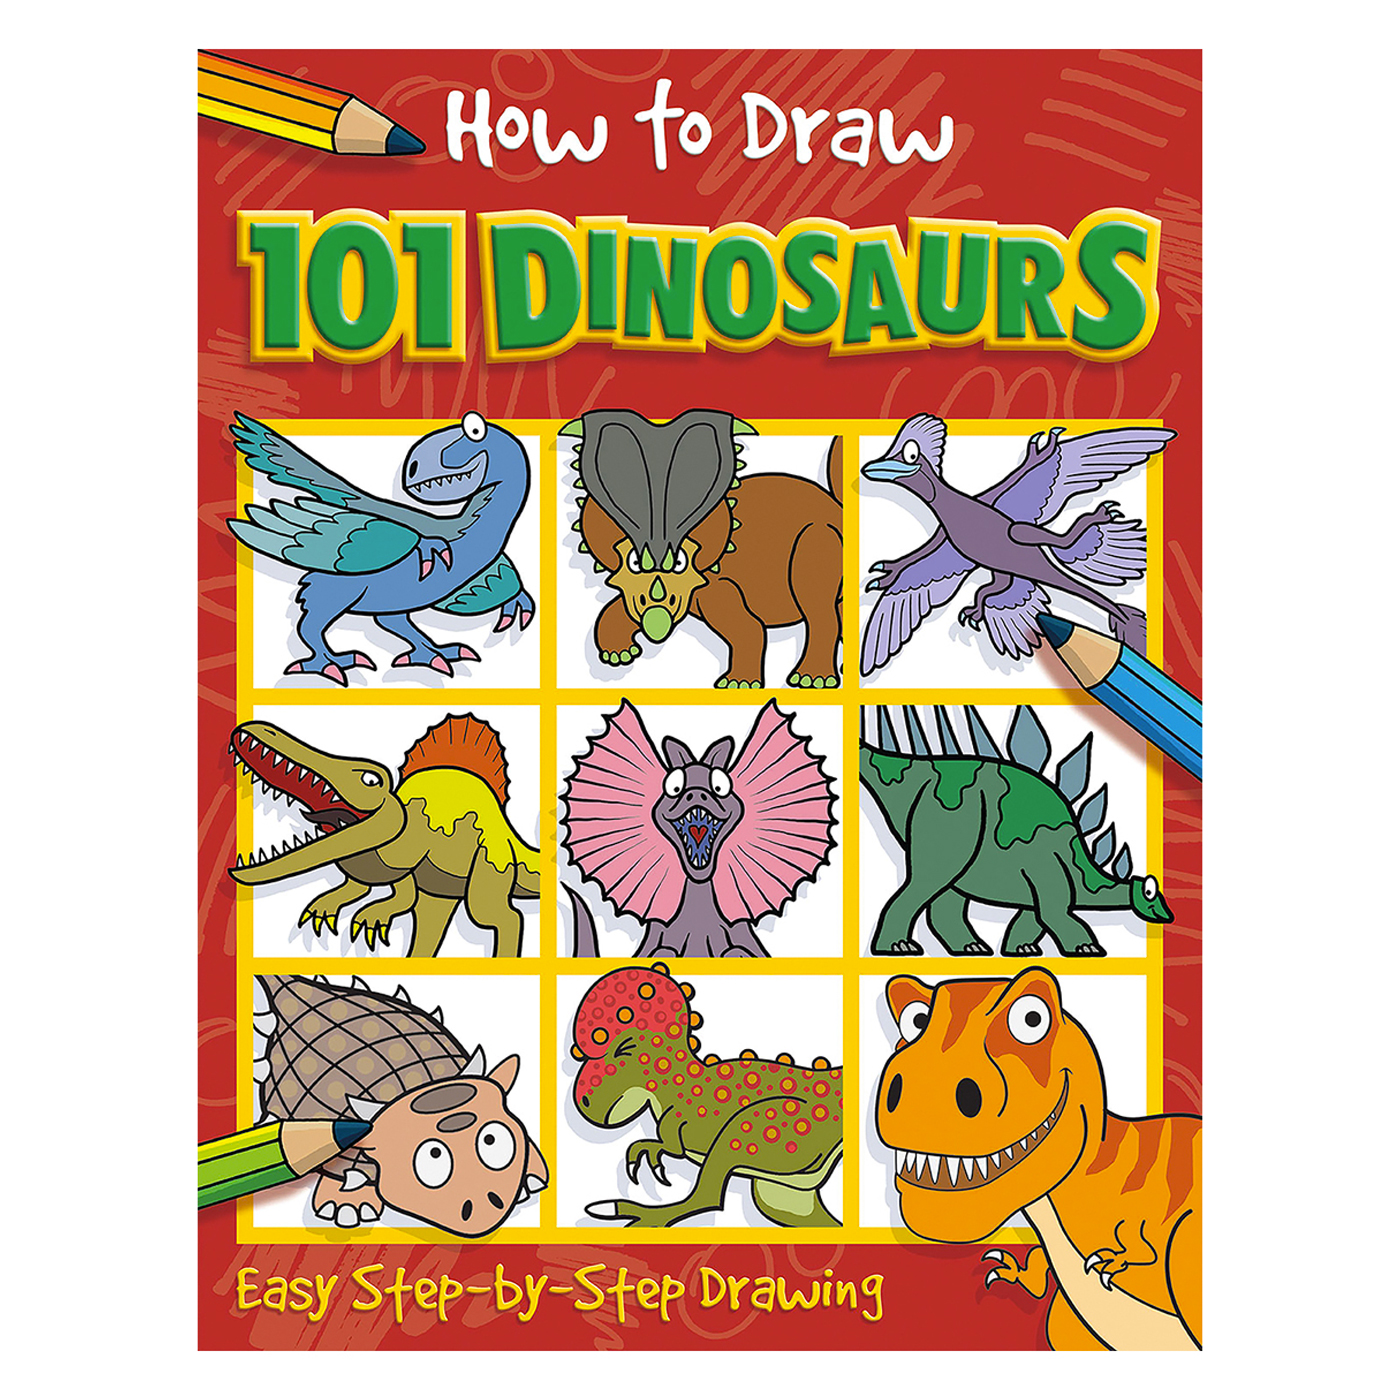  How To Draw 101 Dinosaurs